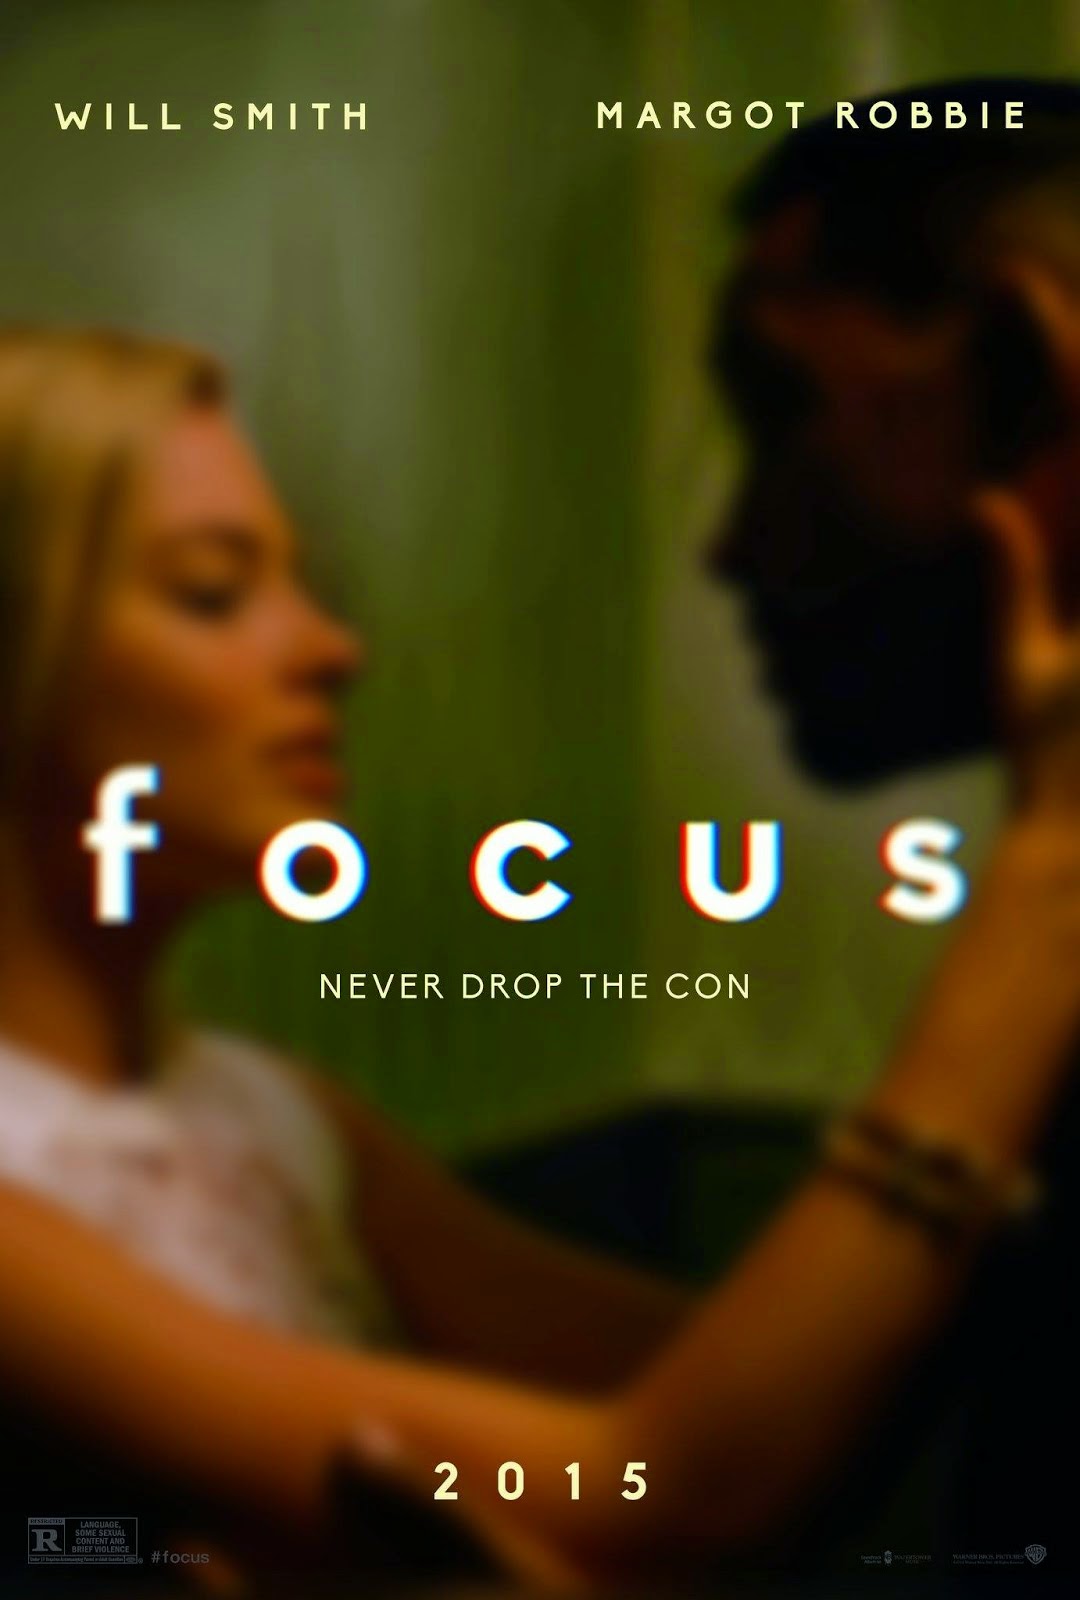 FOCUS WILL SMITH COMING SOON CLICK ON Picture To See Trailer.